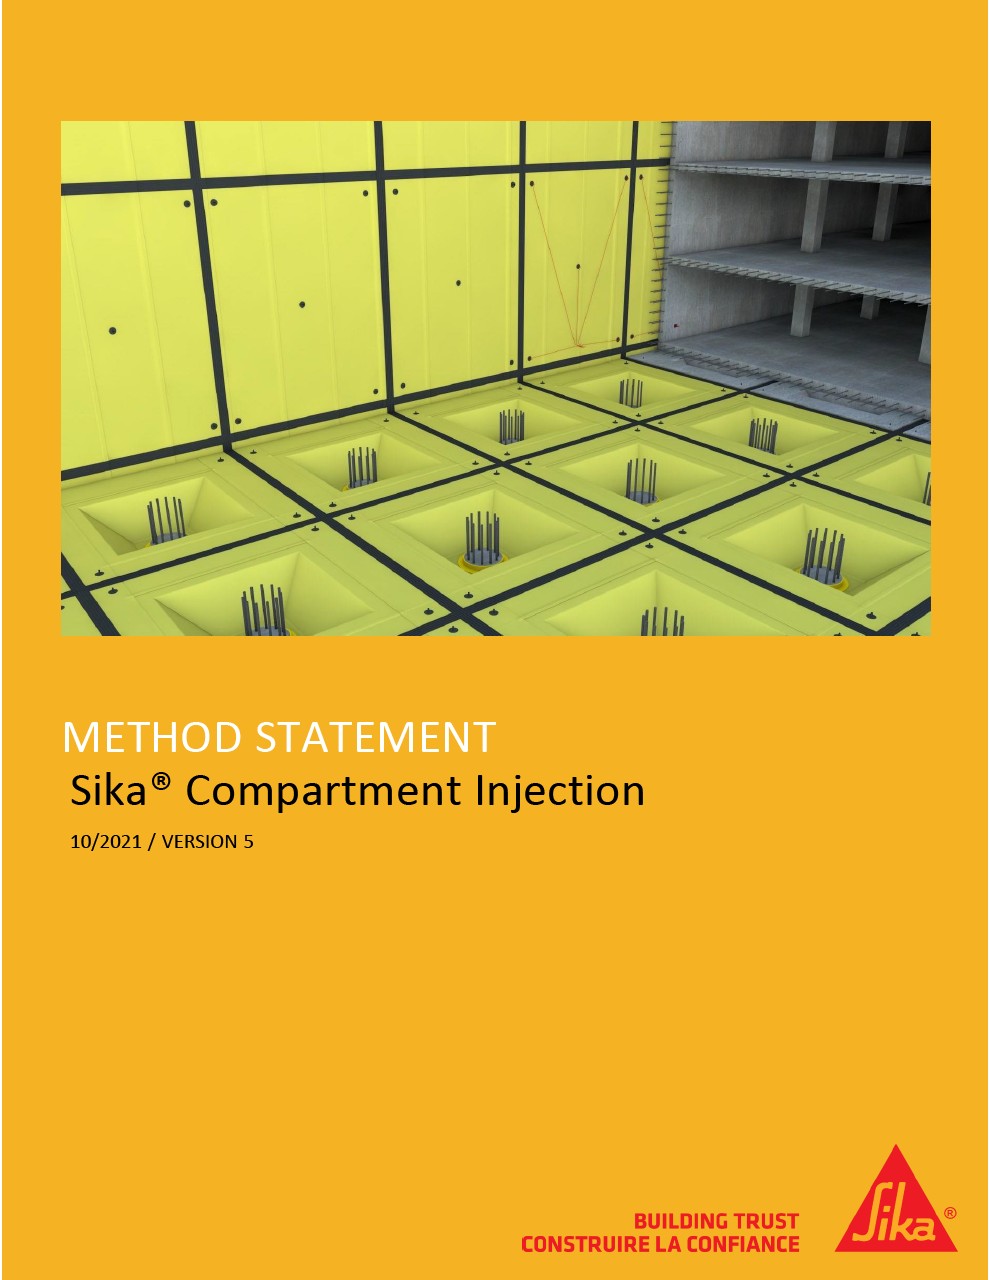 Sika Compartment Injection